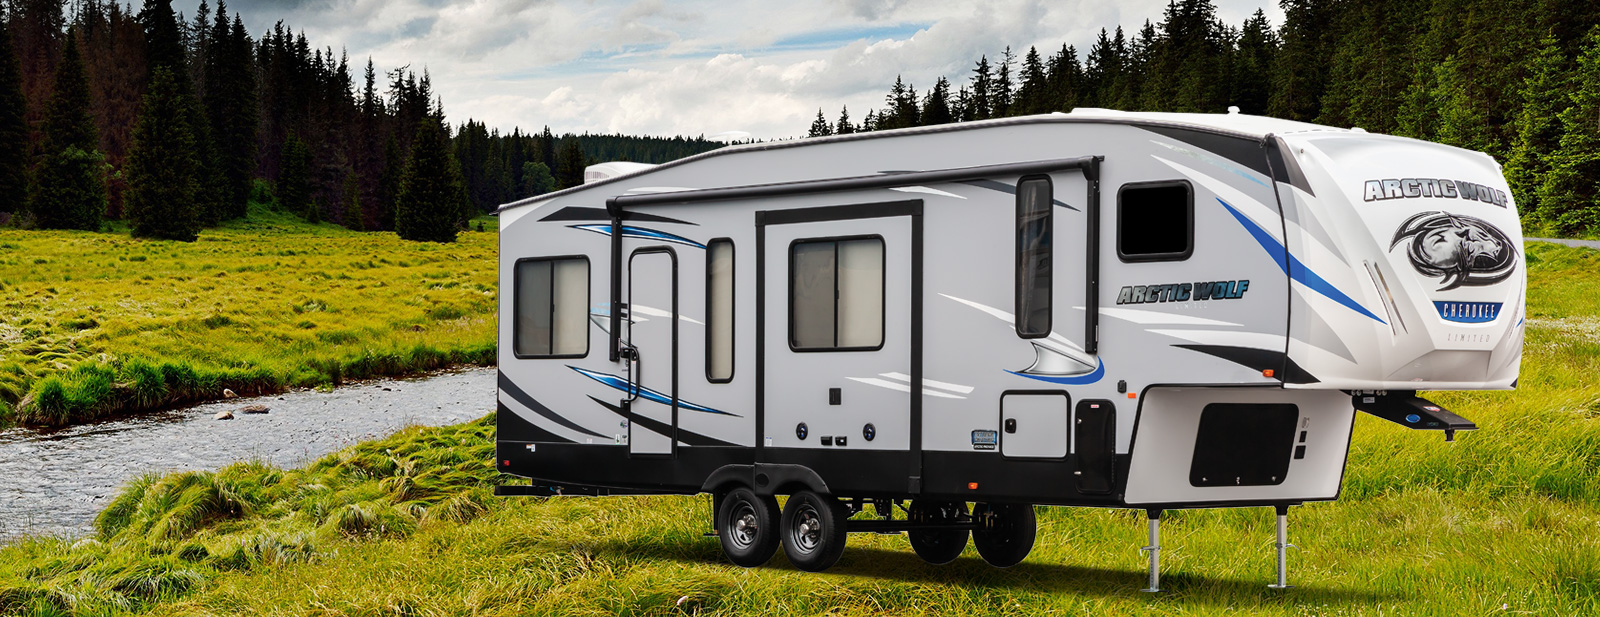 Arctic Wolf Suite Forest River RV Manufacturer of